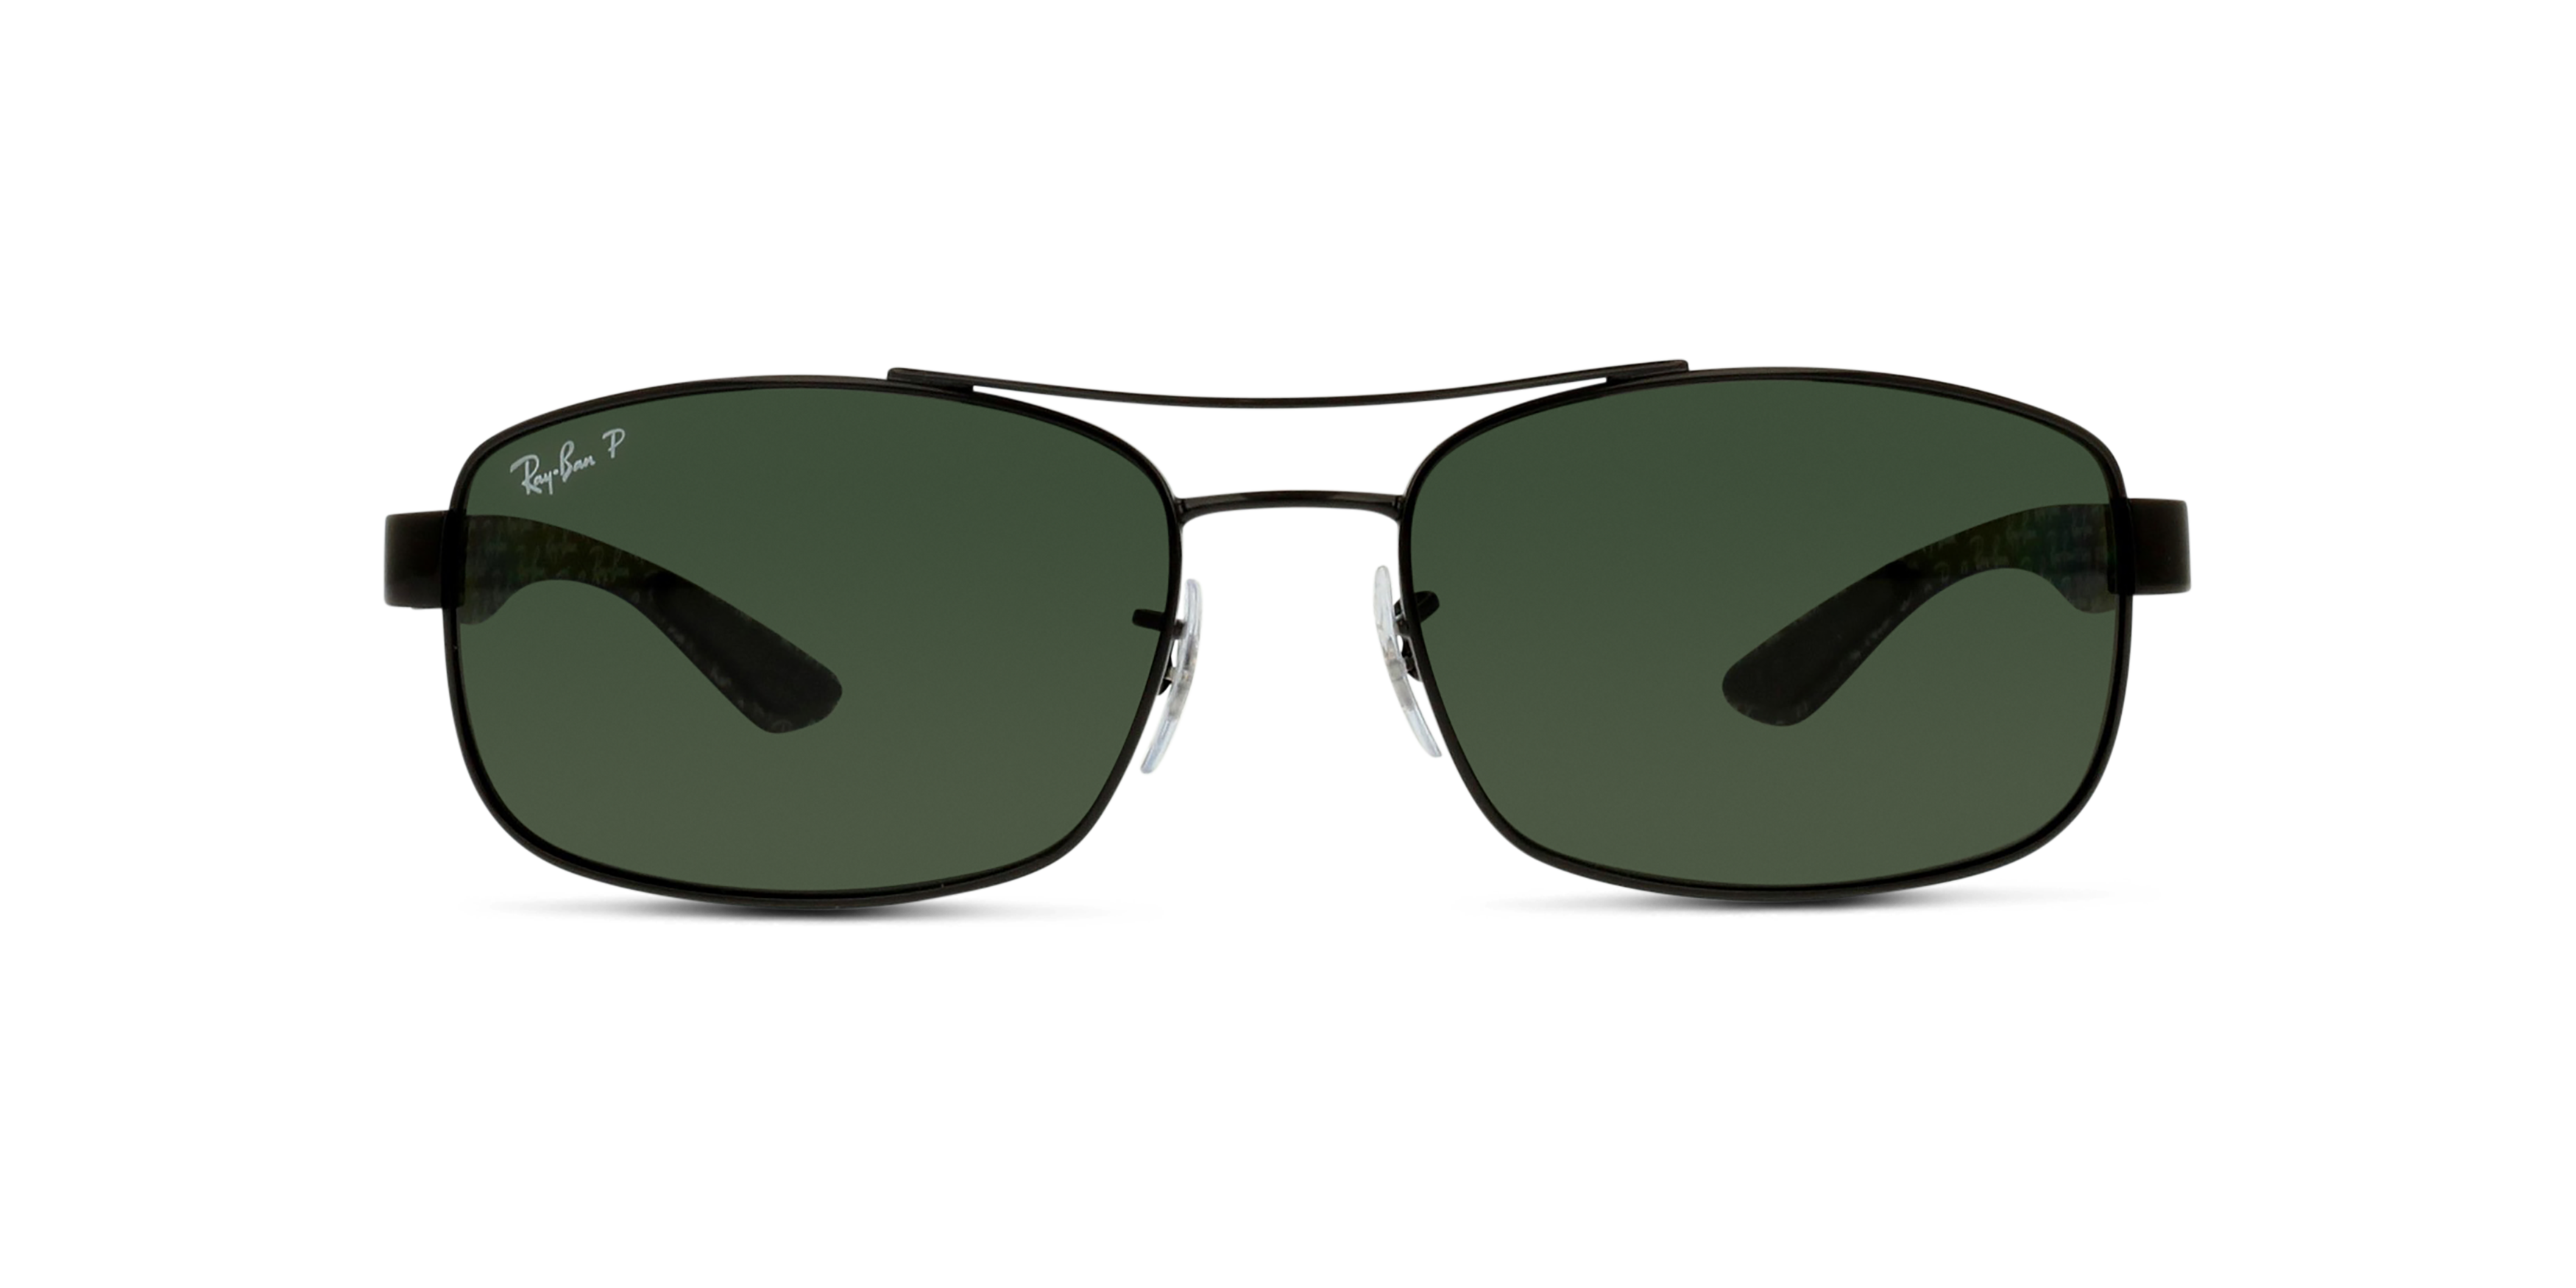 [products.image.front] Ray-Ban RB8316 002/N5